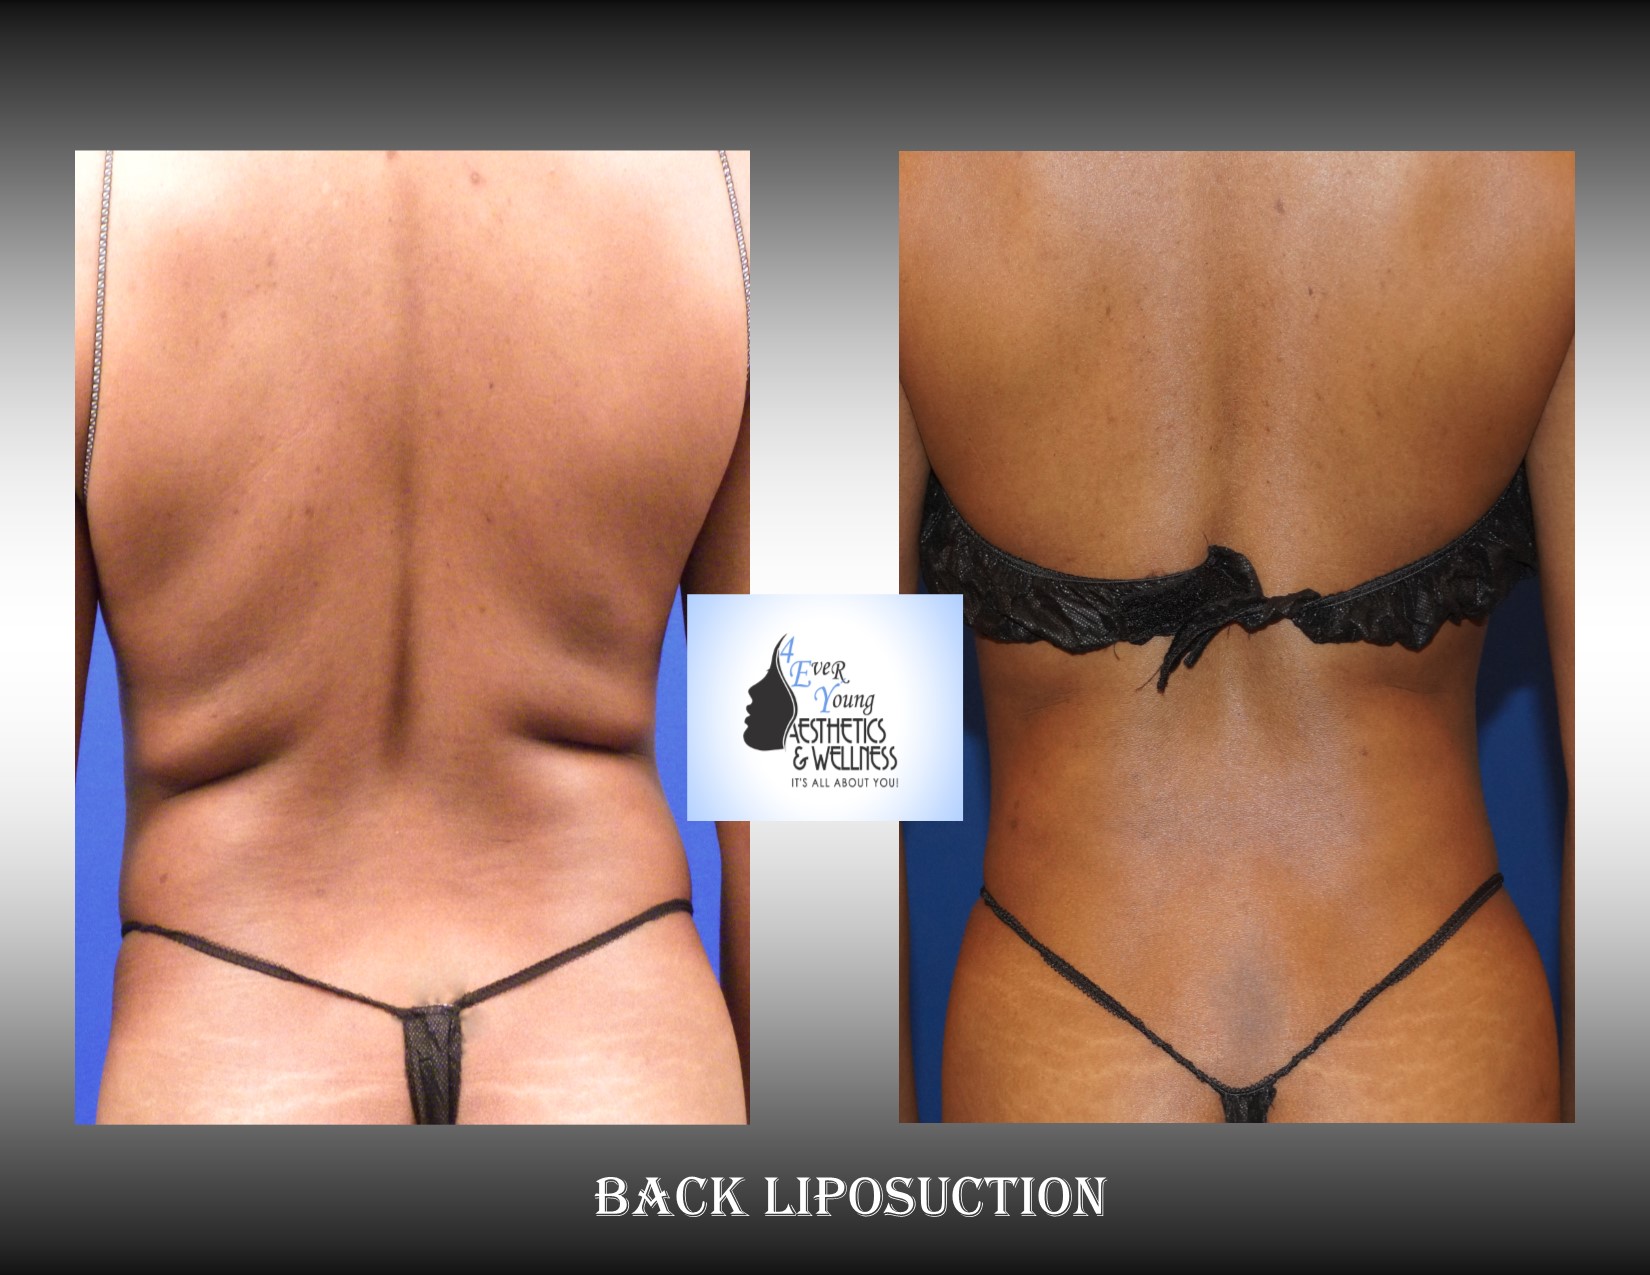 Liposuction plastic surgery is performed using tumescent anesthesia and traditional liposuction plastic surgery.  We are experts in laser liposuction (smartlipo), vaser liposuction and fat transfer, also known as fat grafting.  Our board-certified cosmetic surgeon is an expert at fat removal with liposuction which is an enhancement surgery and doesn’t fall into the scope of practice of a board-certified plastic surgeon who is trained in reconstructive surgery.  Board-certified plastic surgeons with experience in liposuction are certainly qualified to perform the procedure but being trained strictly in plastic surgery is misleading.  We use abdominal liposuction, flank liposuction, back liposuction, arm liposuction, thigh liposuction and ankle liposuction to remove unsightly fat from problem areas with our tumescent liposuction procedures with or without sedation. If you desire we use autologous fat transfer (fat grafting) to use the fat obtained as the most natural dermal filler unlike synthetic fillers (Restylane, Juvederm, Sculptra, Radiesse, Belotero, Perlane) to improve fine lines and wrinkles of the face, hand rejuvenation with fat, fat transfer to breast, Brazilian Butt Lift (Butt Augmentation), liposculpture, lip augmentation with fat.  Fat transfer to the breast can be a great alternative to breast augmentation, saline implants, silicone implants, breast augmentation with mastopexy or just to improve volume in the upper pole of the breast.    